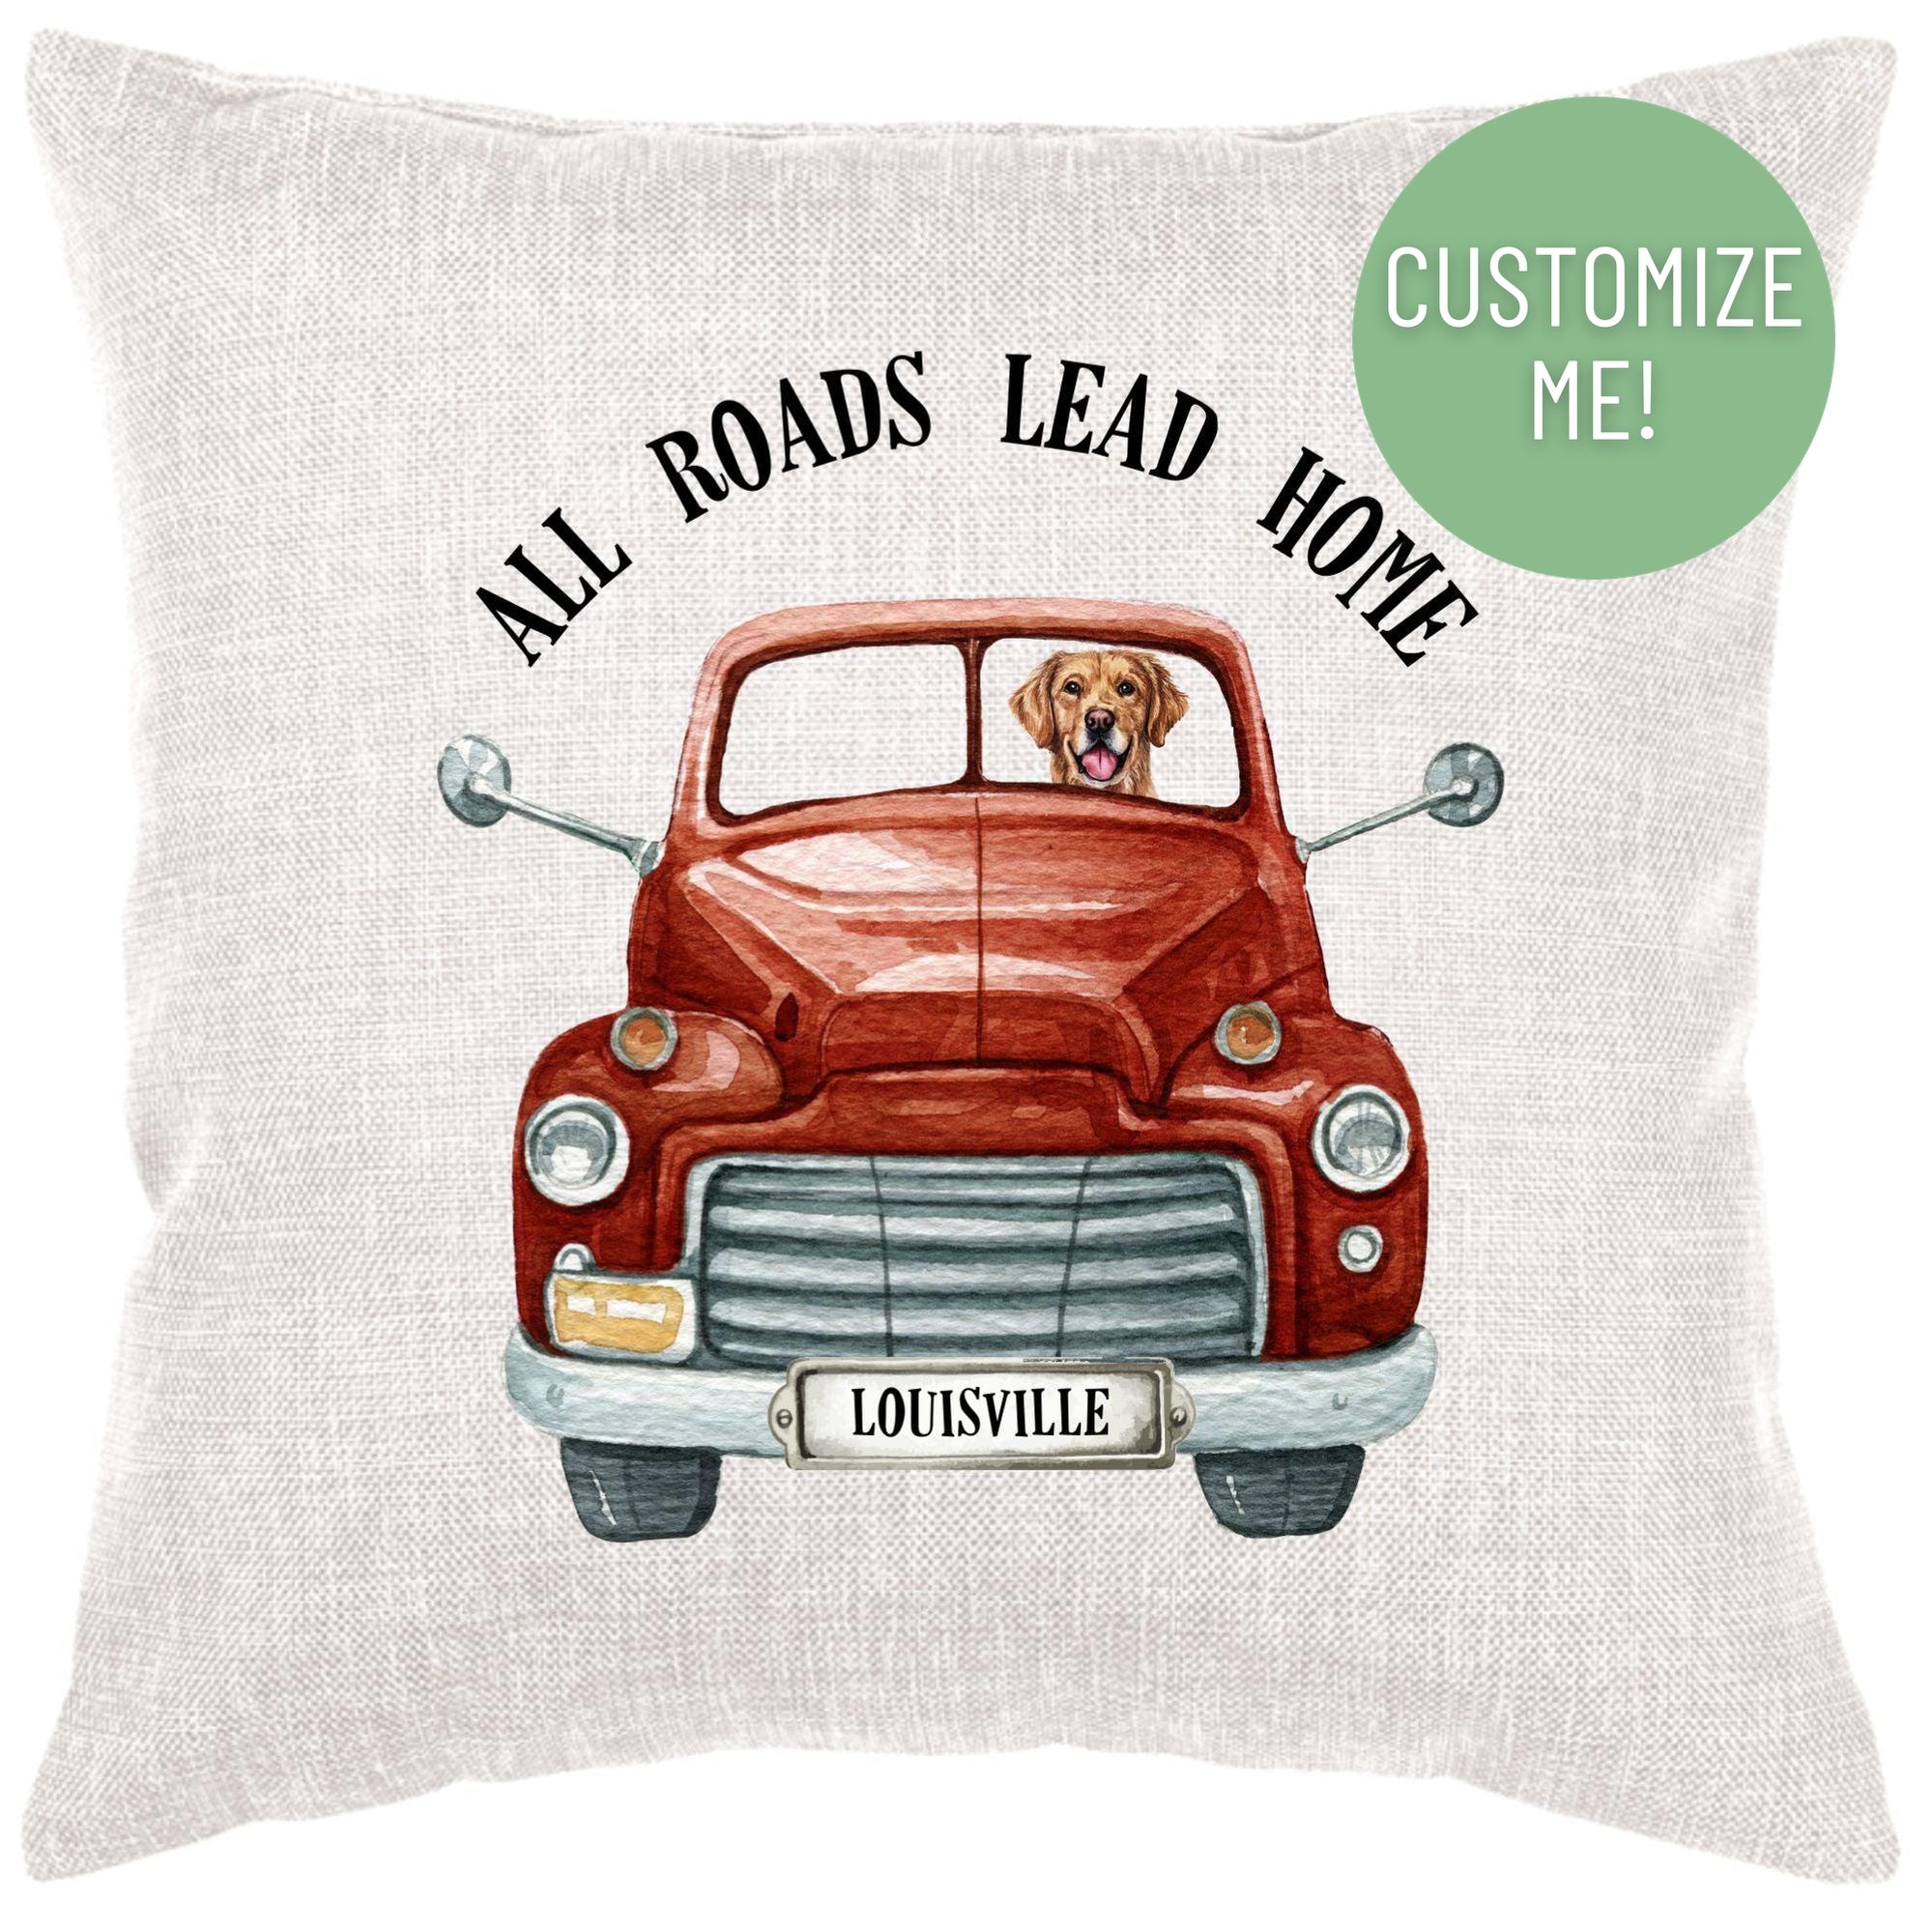 All Roads Lead Home Truck Down Pillow